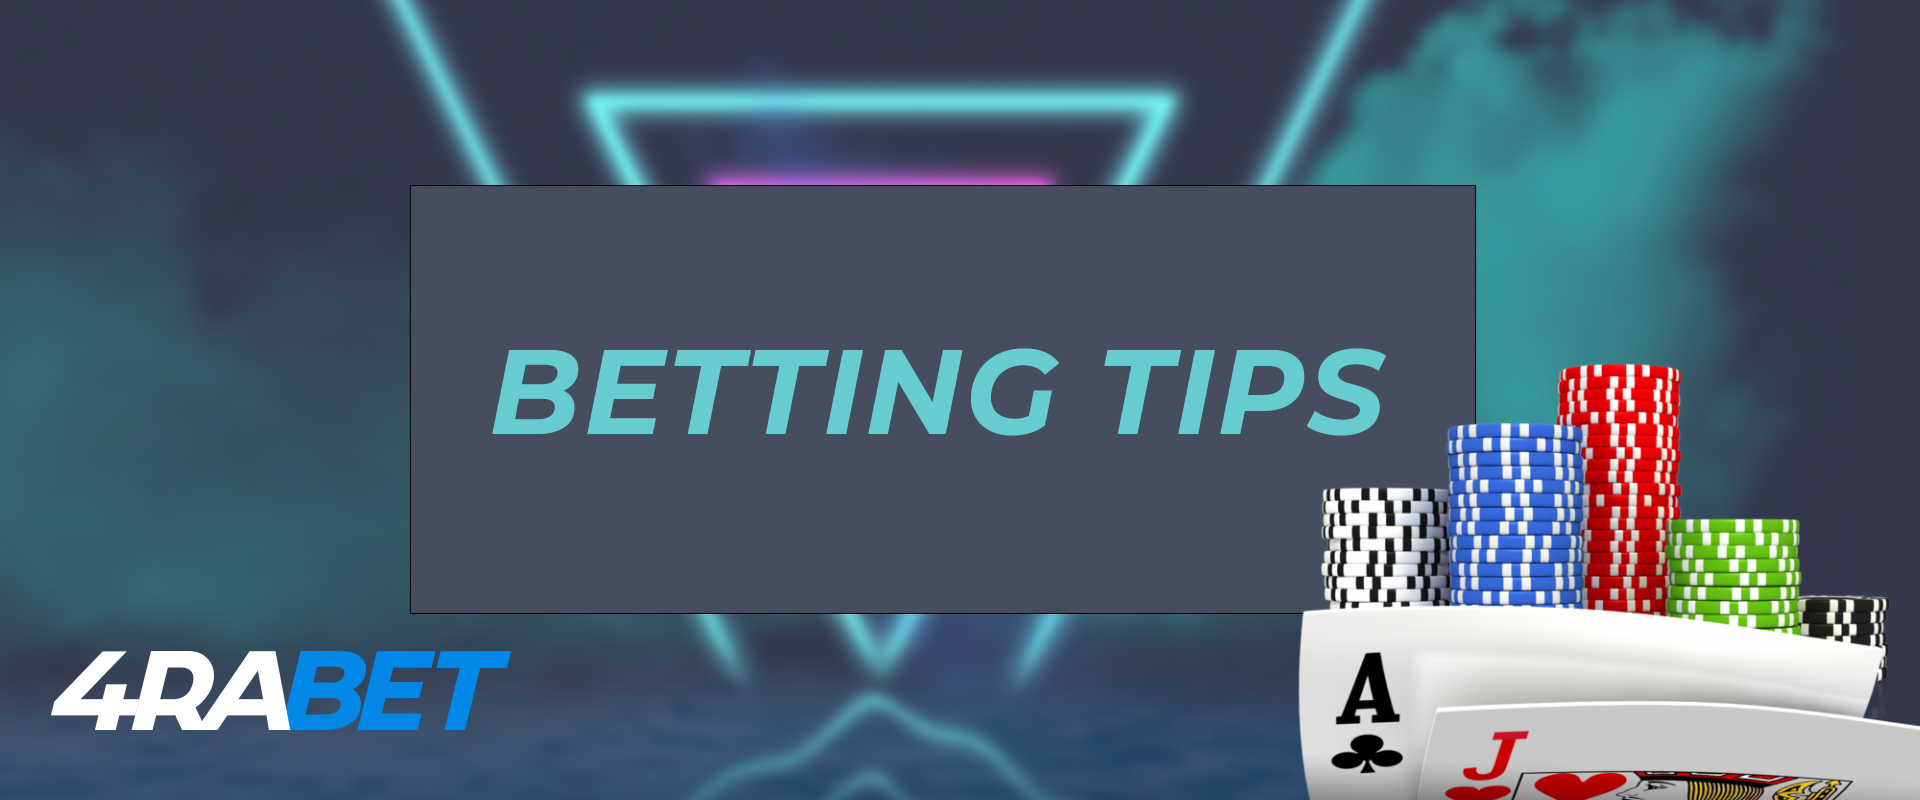 Tips which help you to increase the baccarat winrate.